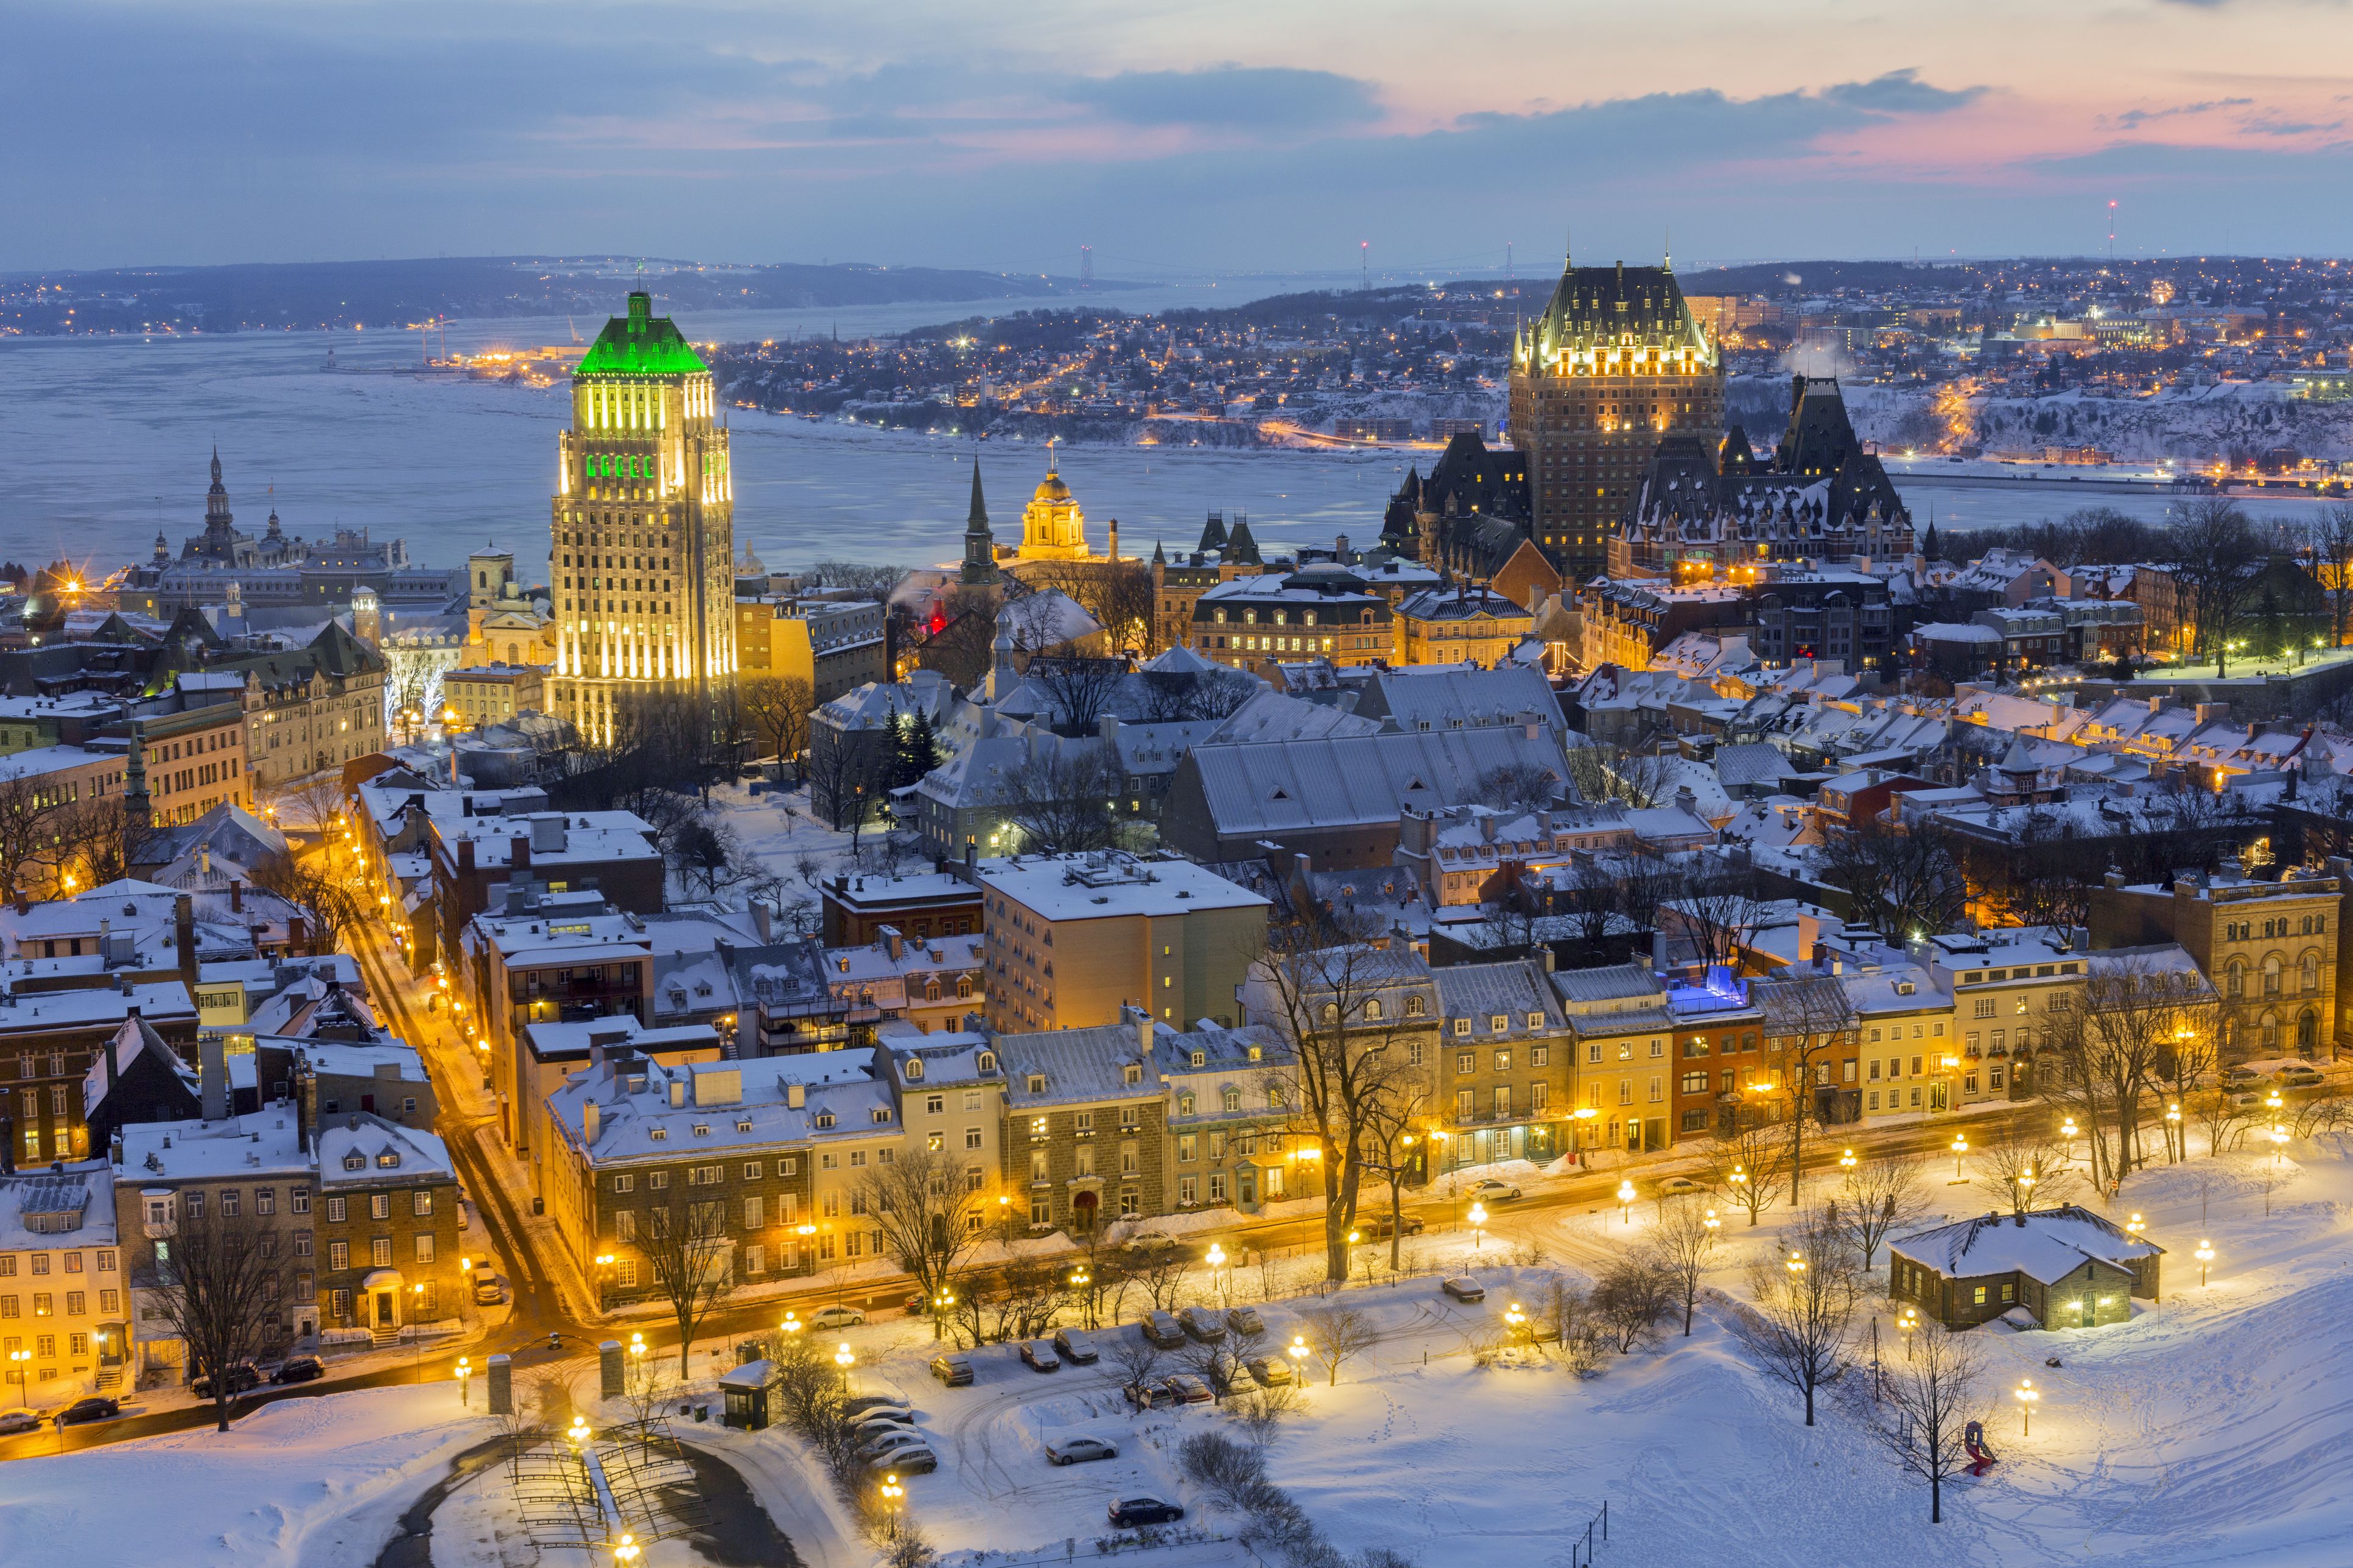 Canada Quebec Province Quebec City In Winter The Upper Town Of Old Quebec Declared A World Heritage By Unesco 536911491 574d04ab5f9b5851656345f6 